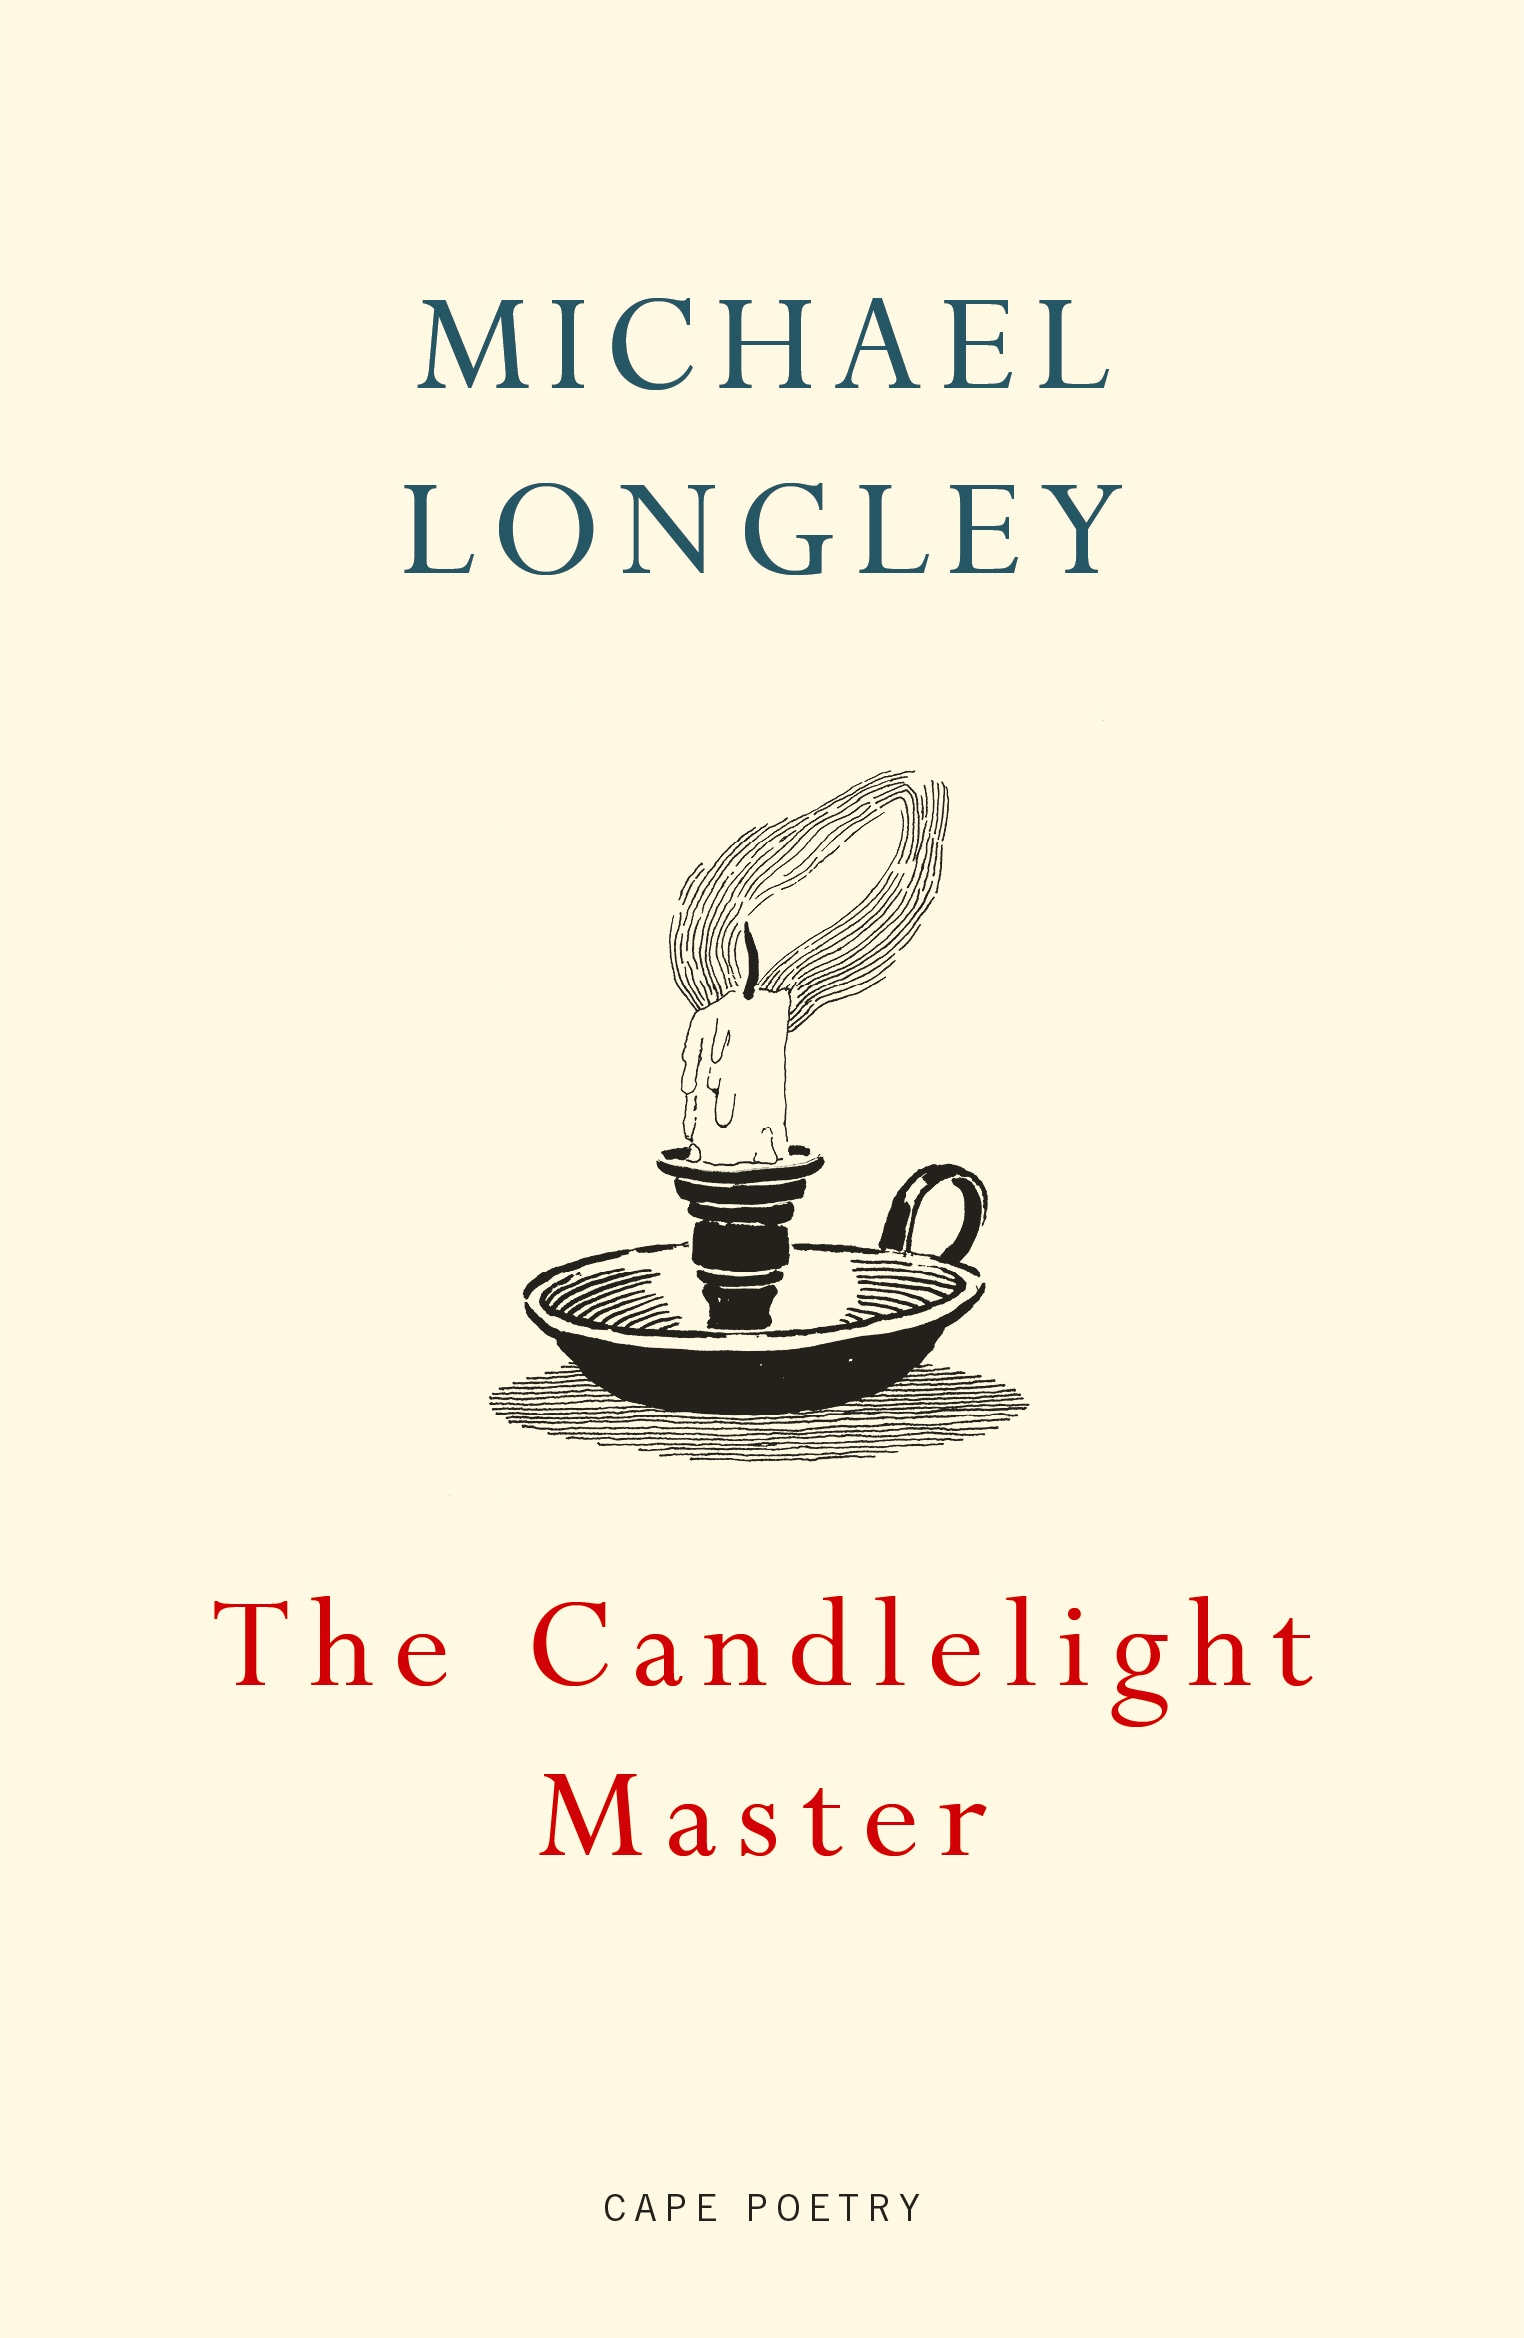 Book “The Candlelight Master” by Michael Longley — August 6, 2020